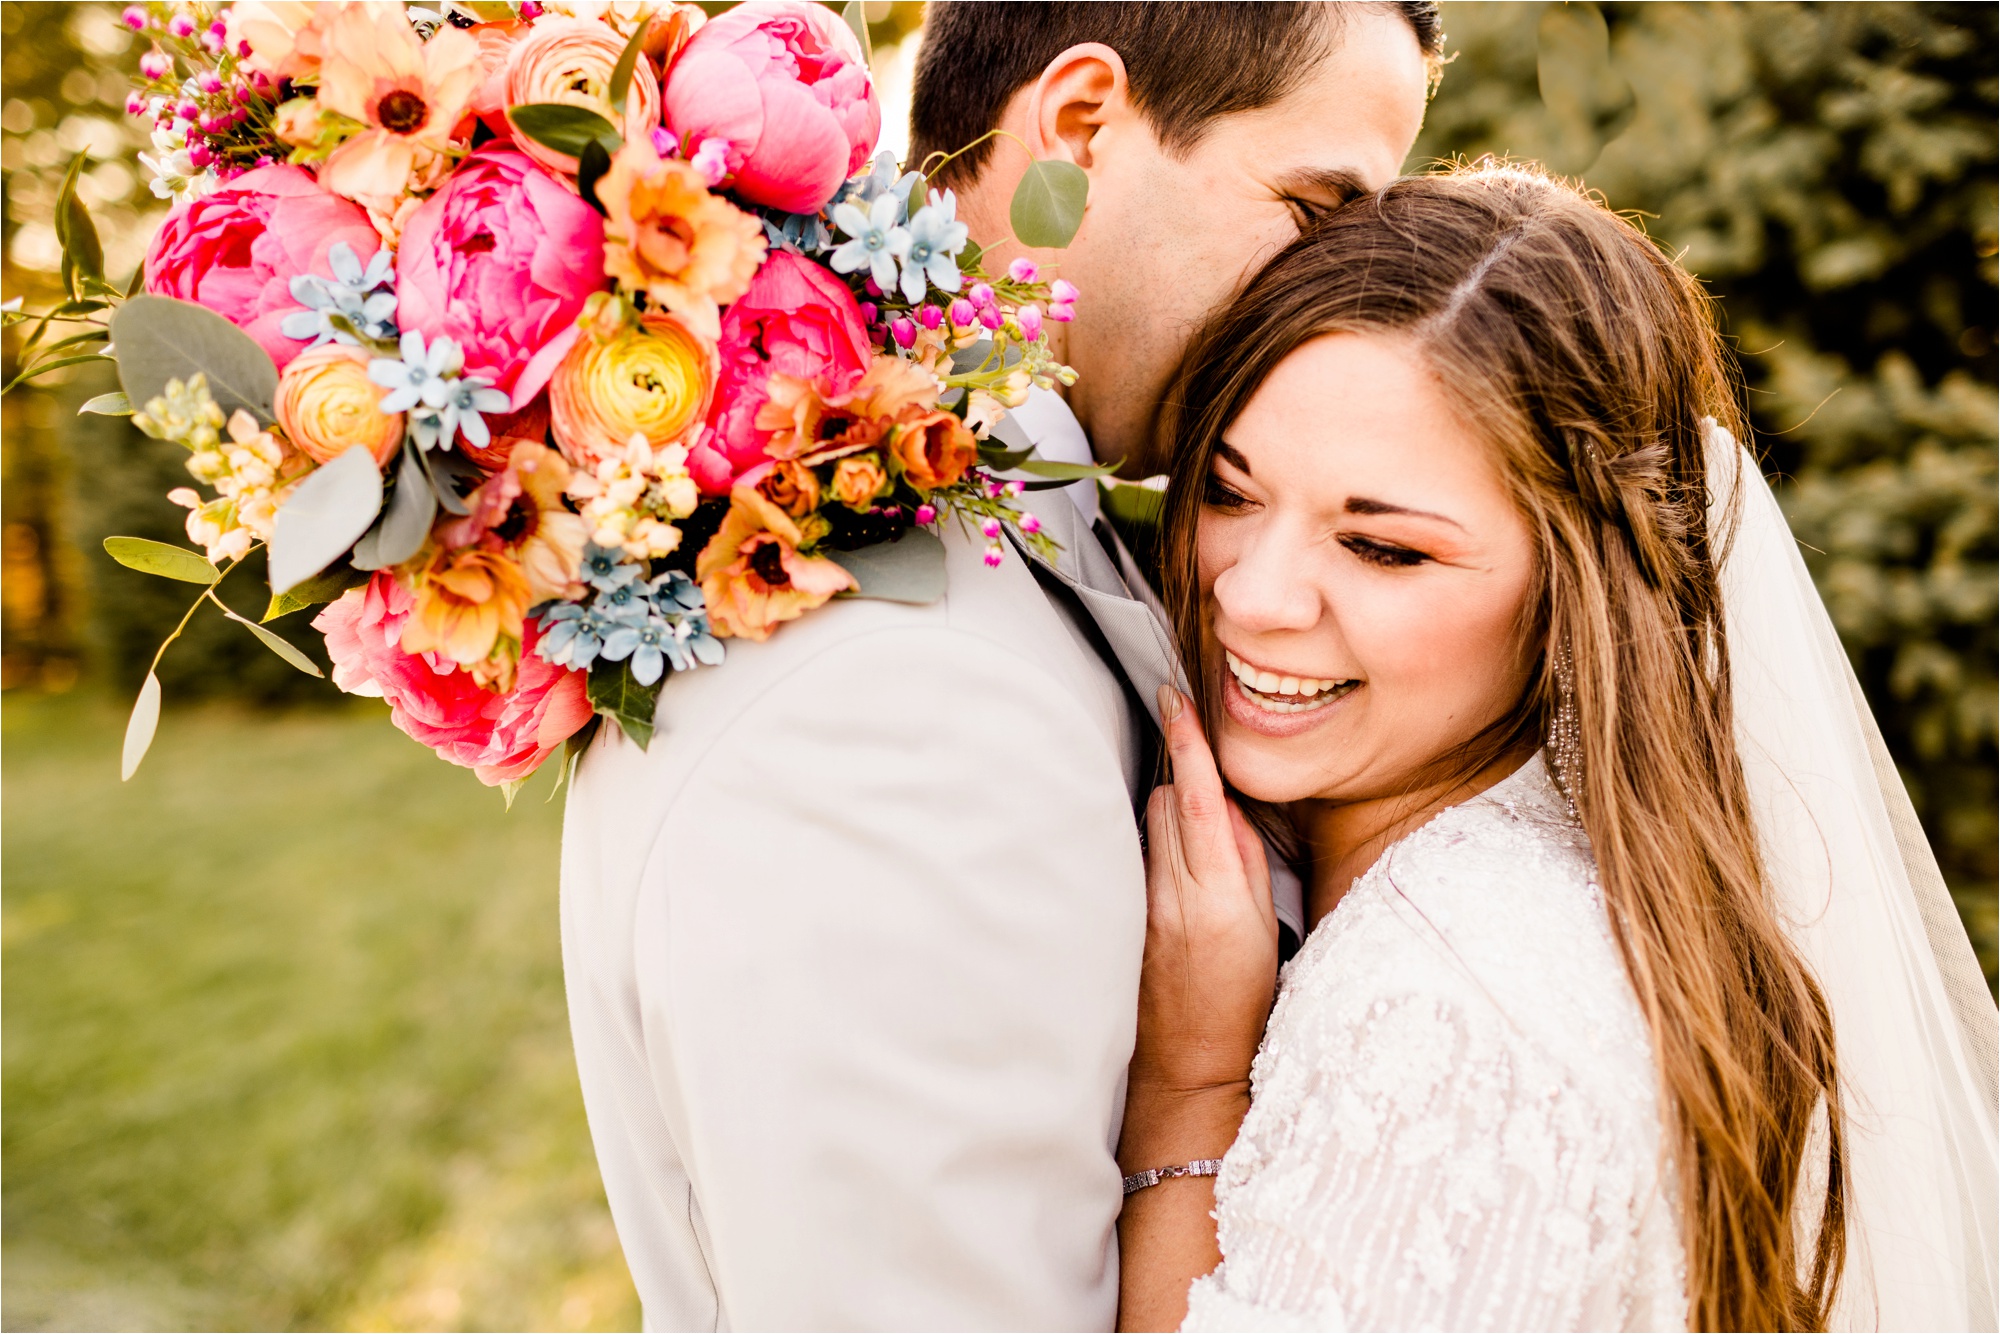 Caitlin and Luke Photography, Illinois Wedding Photographers, Champaign Wedding Photographers, Bloomington Normal Wedding Photographers, Romantic Red and Pink Sunset Styled Shoot_9564.jpg